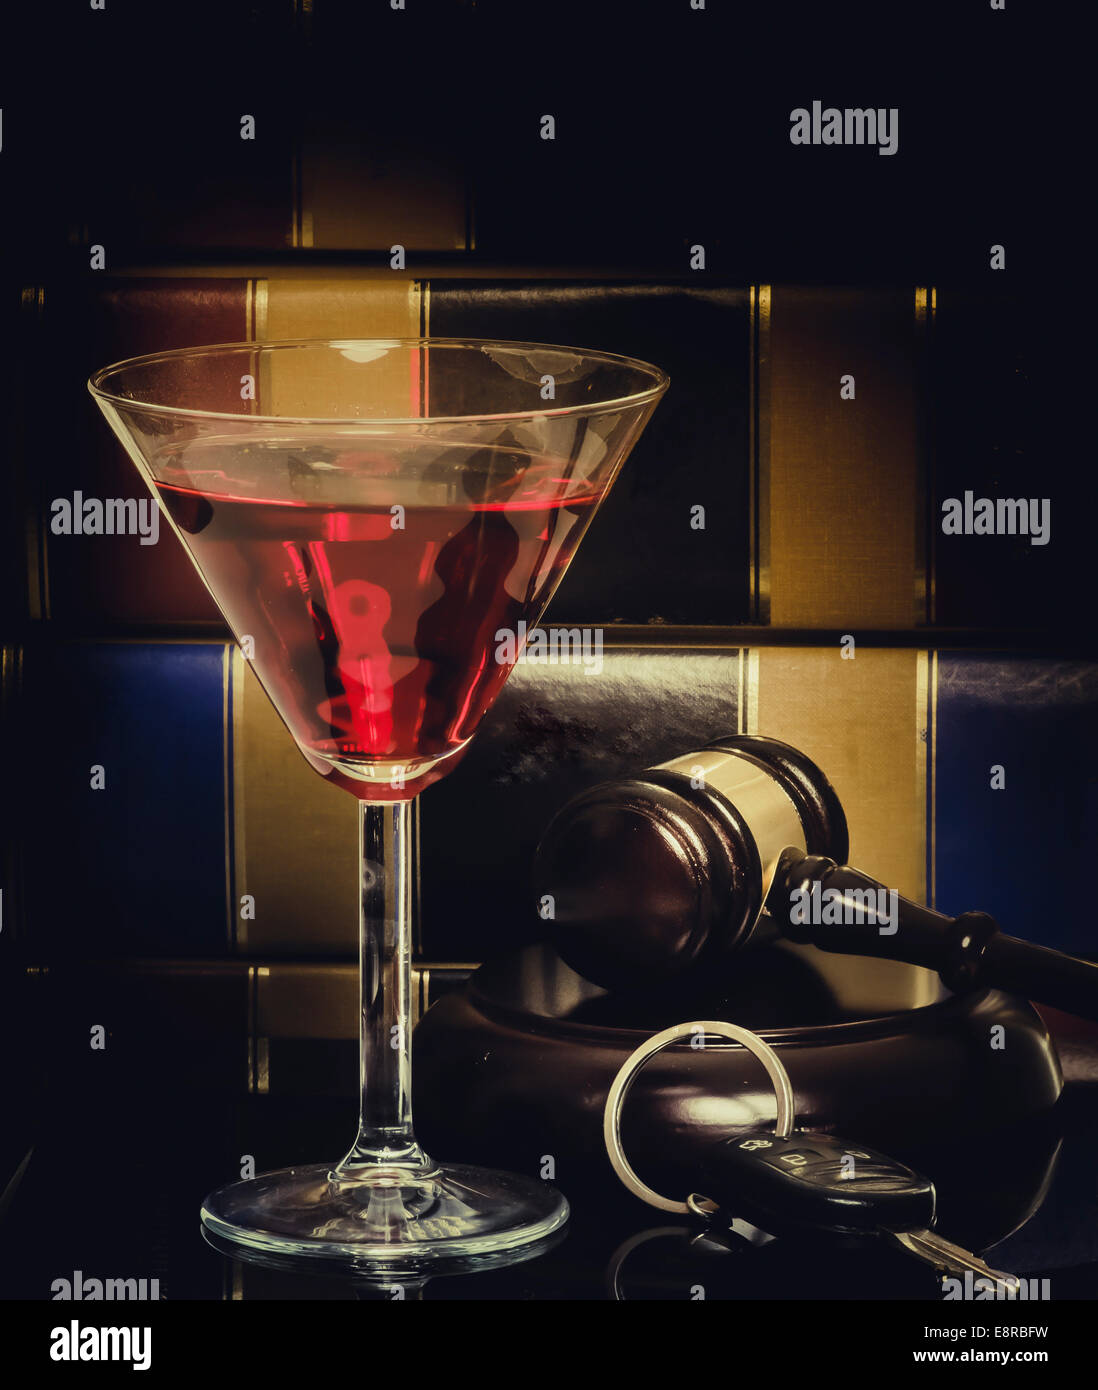 Dui, drink driving, law legal concept image..... Books, wine glass and car keys. Stock Photo